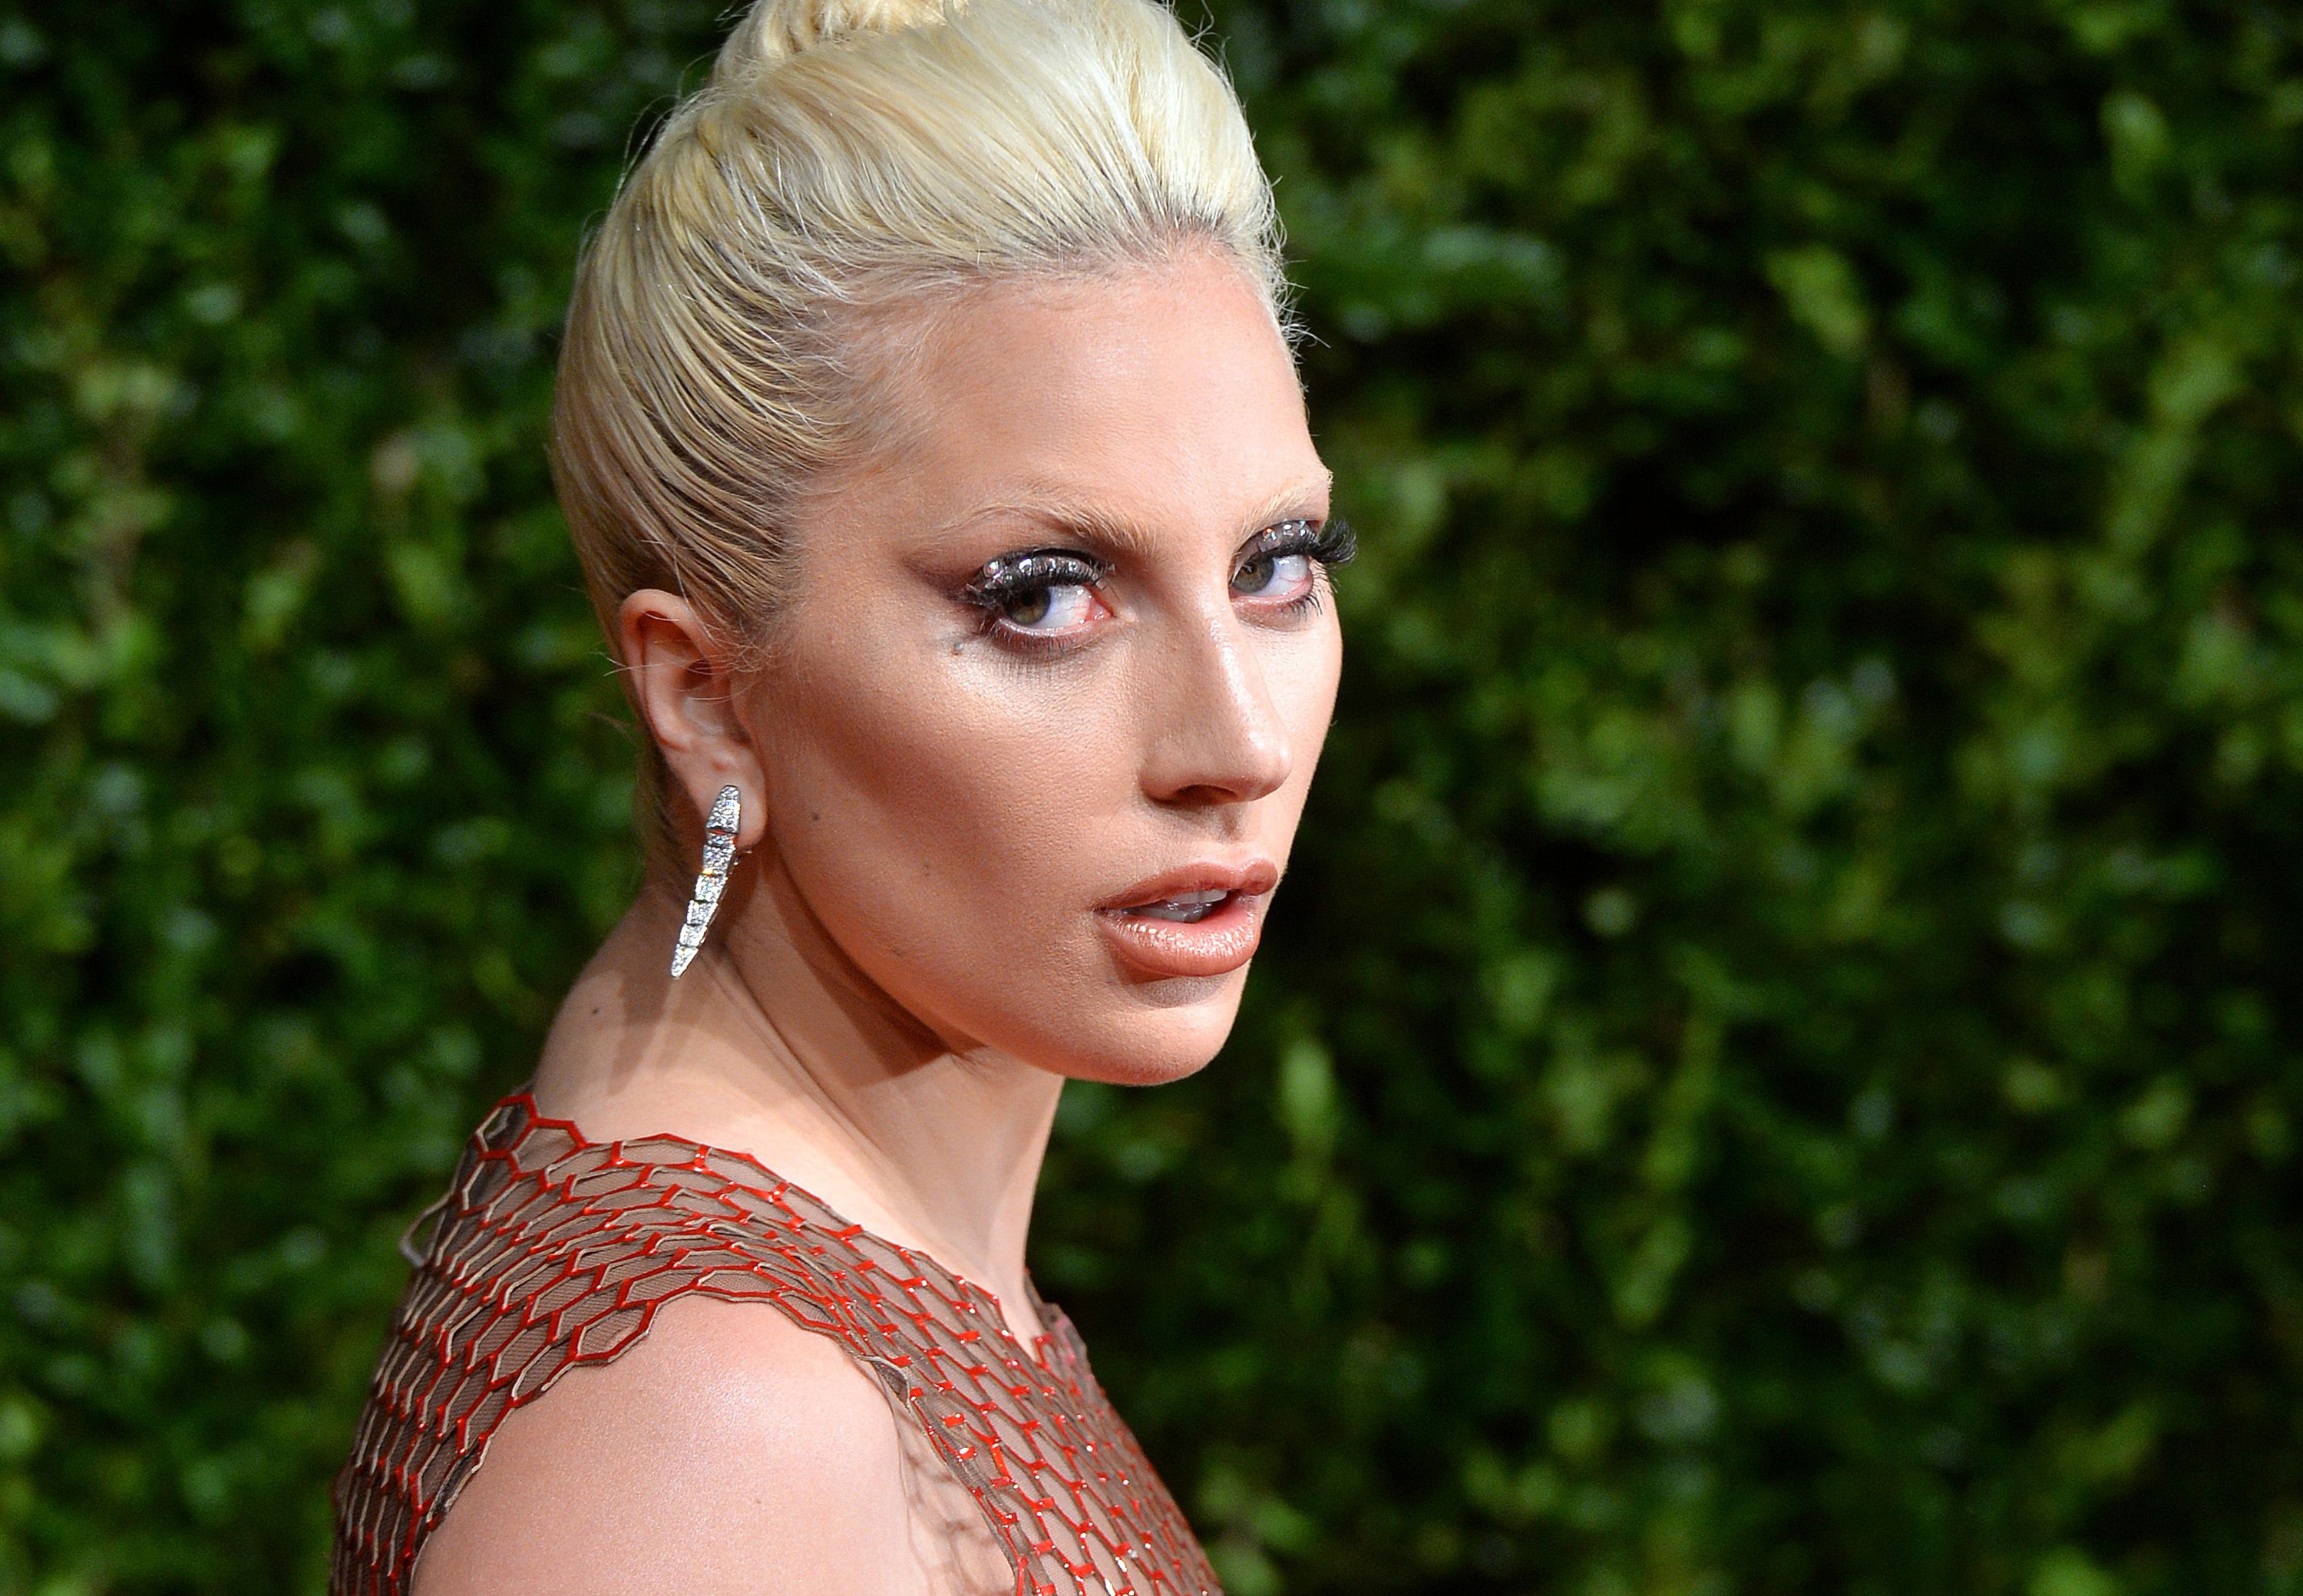 Facts And Debunked Rumors About The Birth Of Lady Gaga